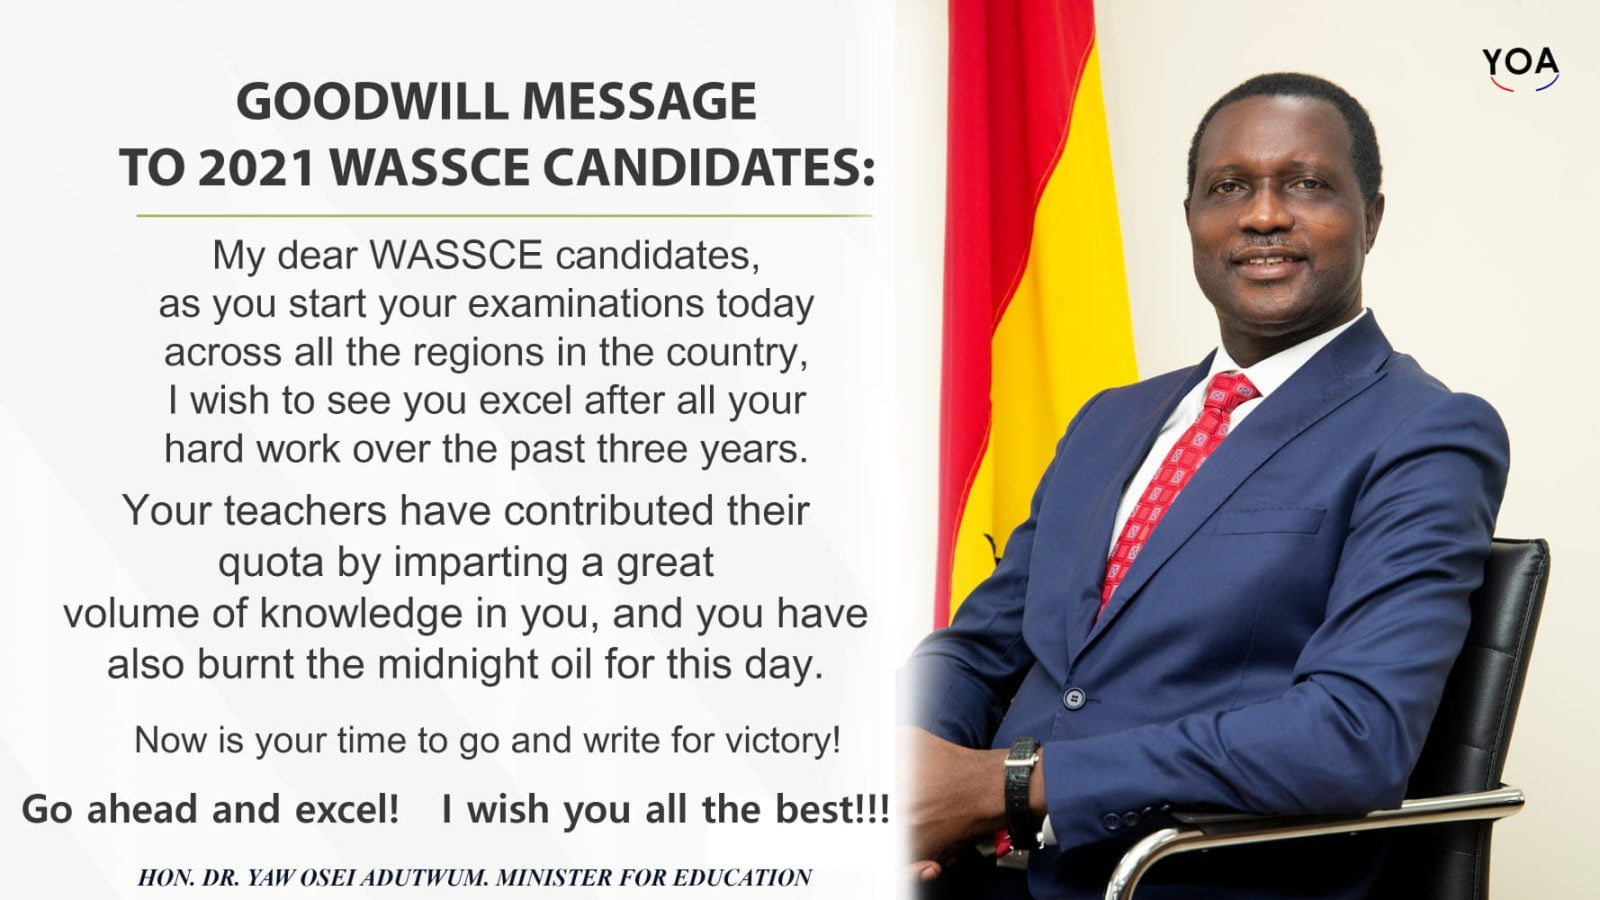 Powerful Goodwill Message to 2021 WASSCE Candidates from Dr. Adutwum